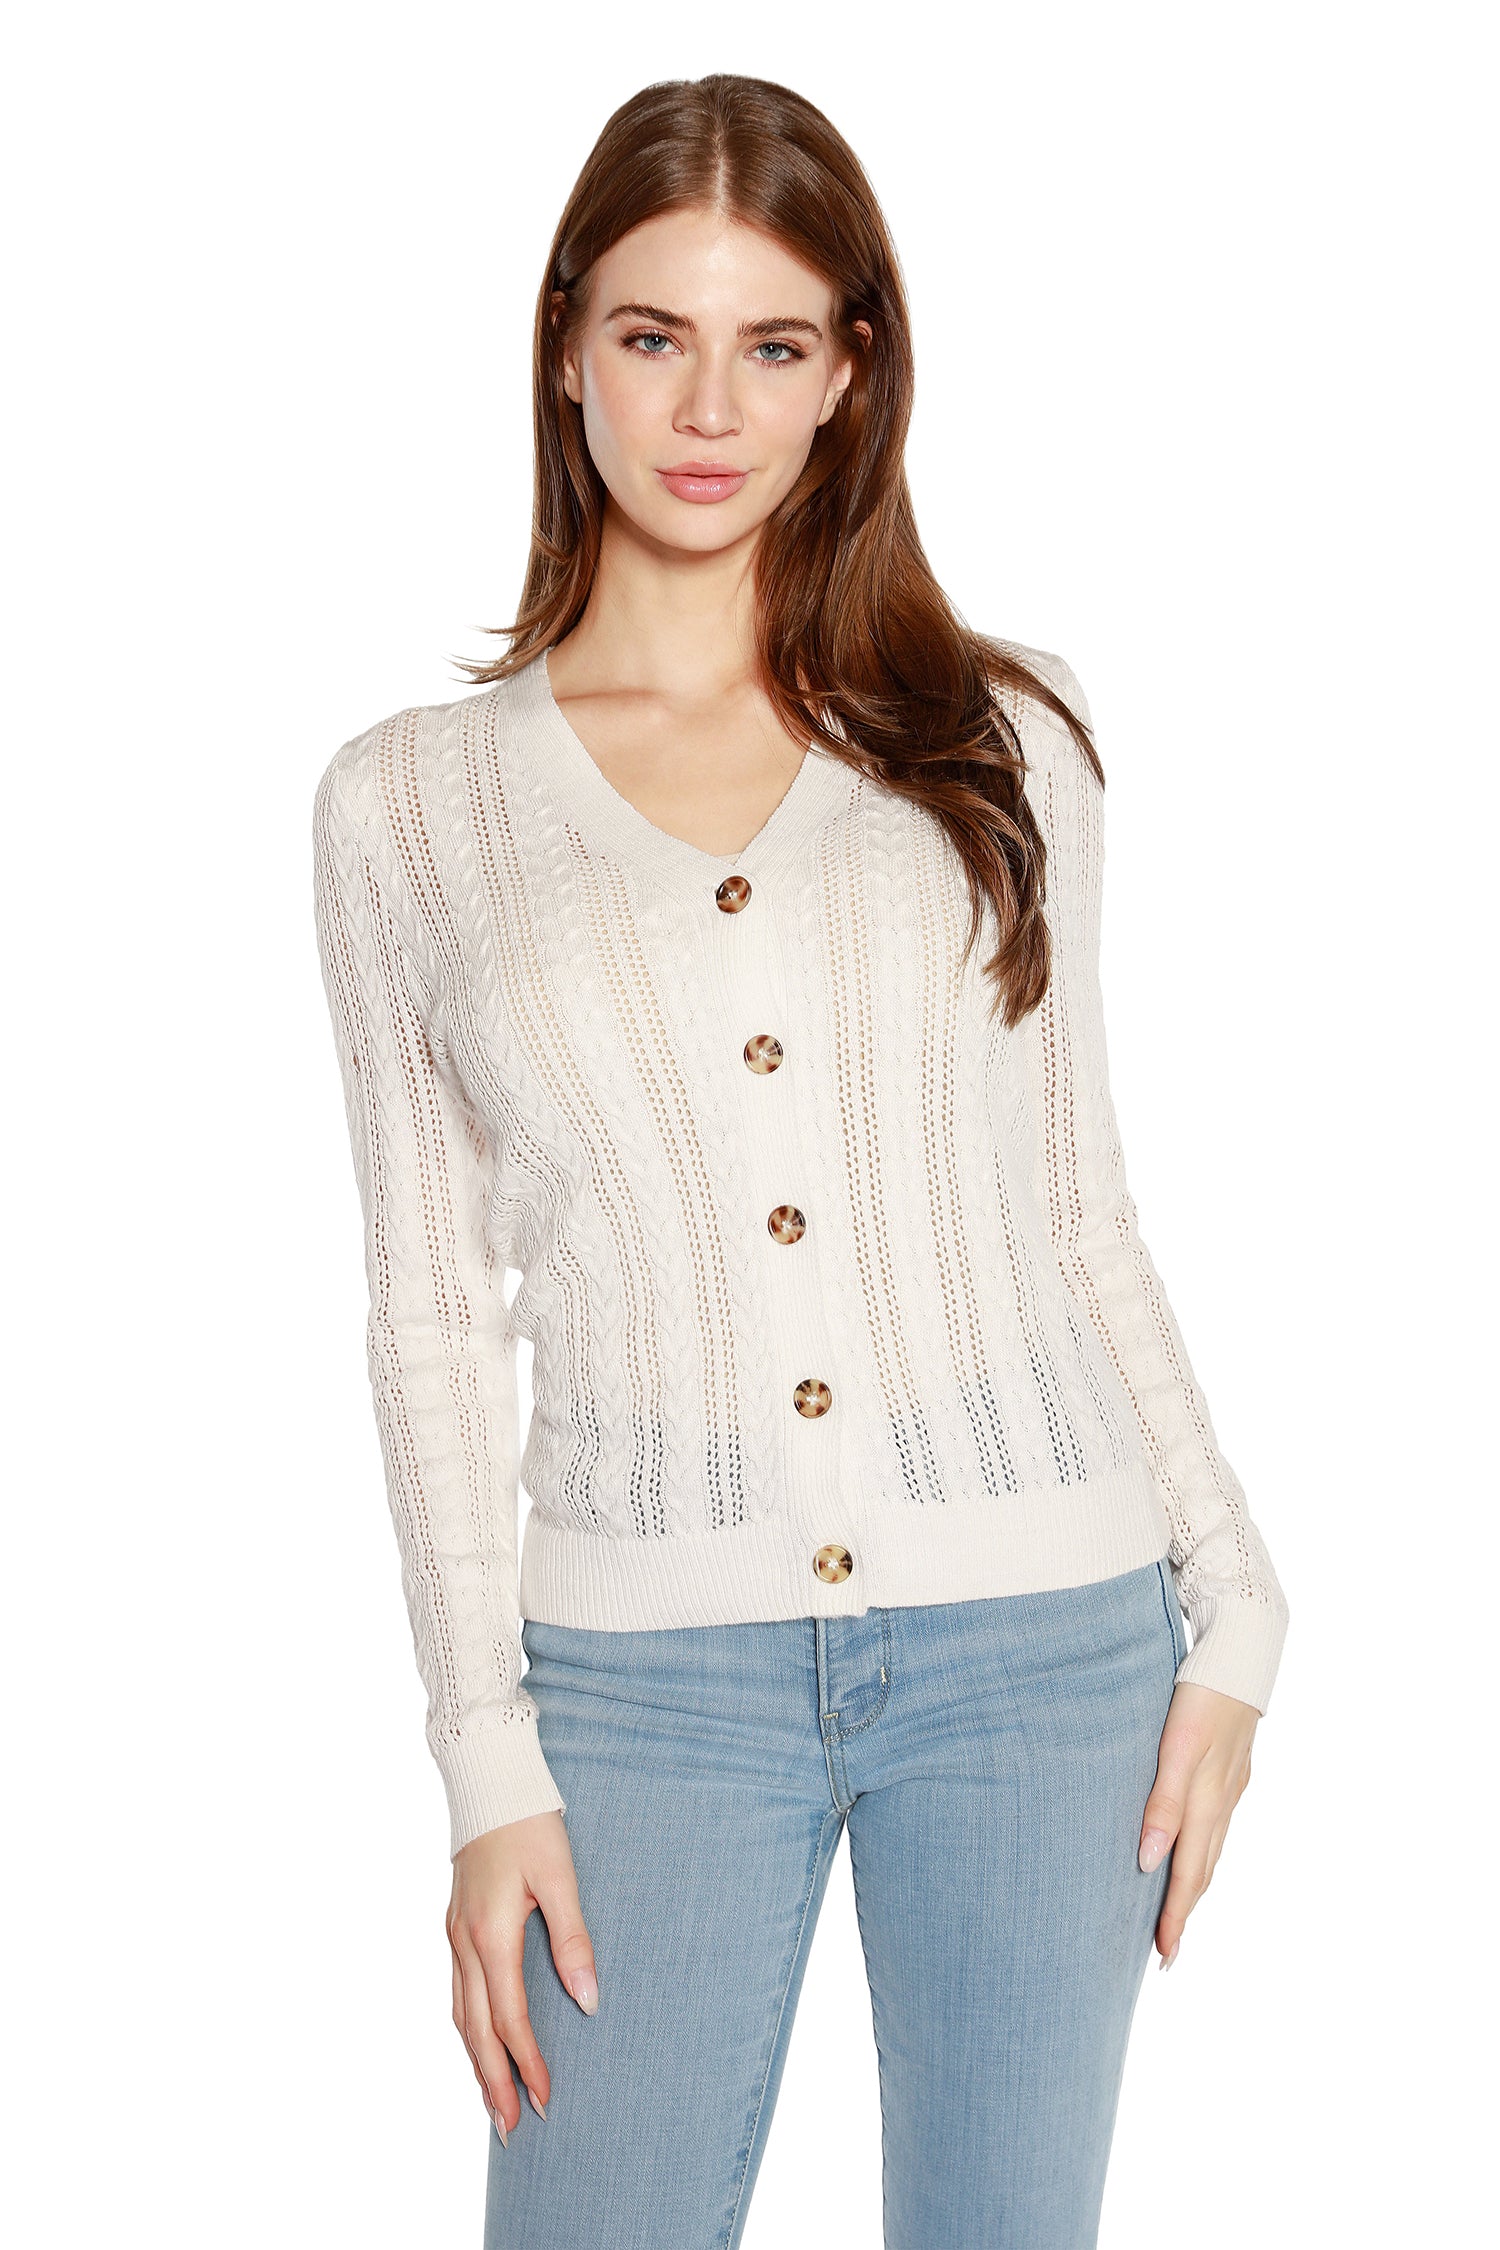 Women’s Lightweight Semi Sheer Cable Knit Button Front Cardigan